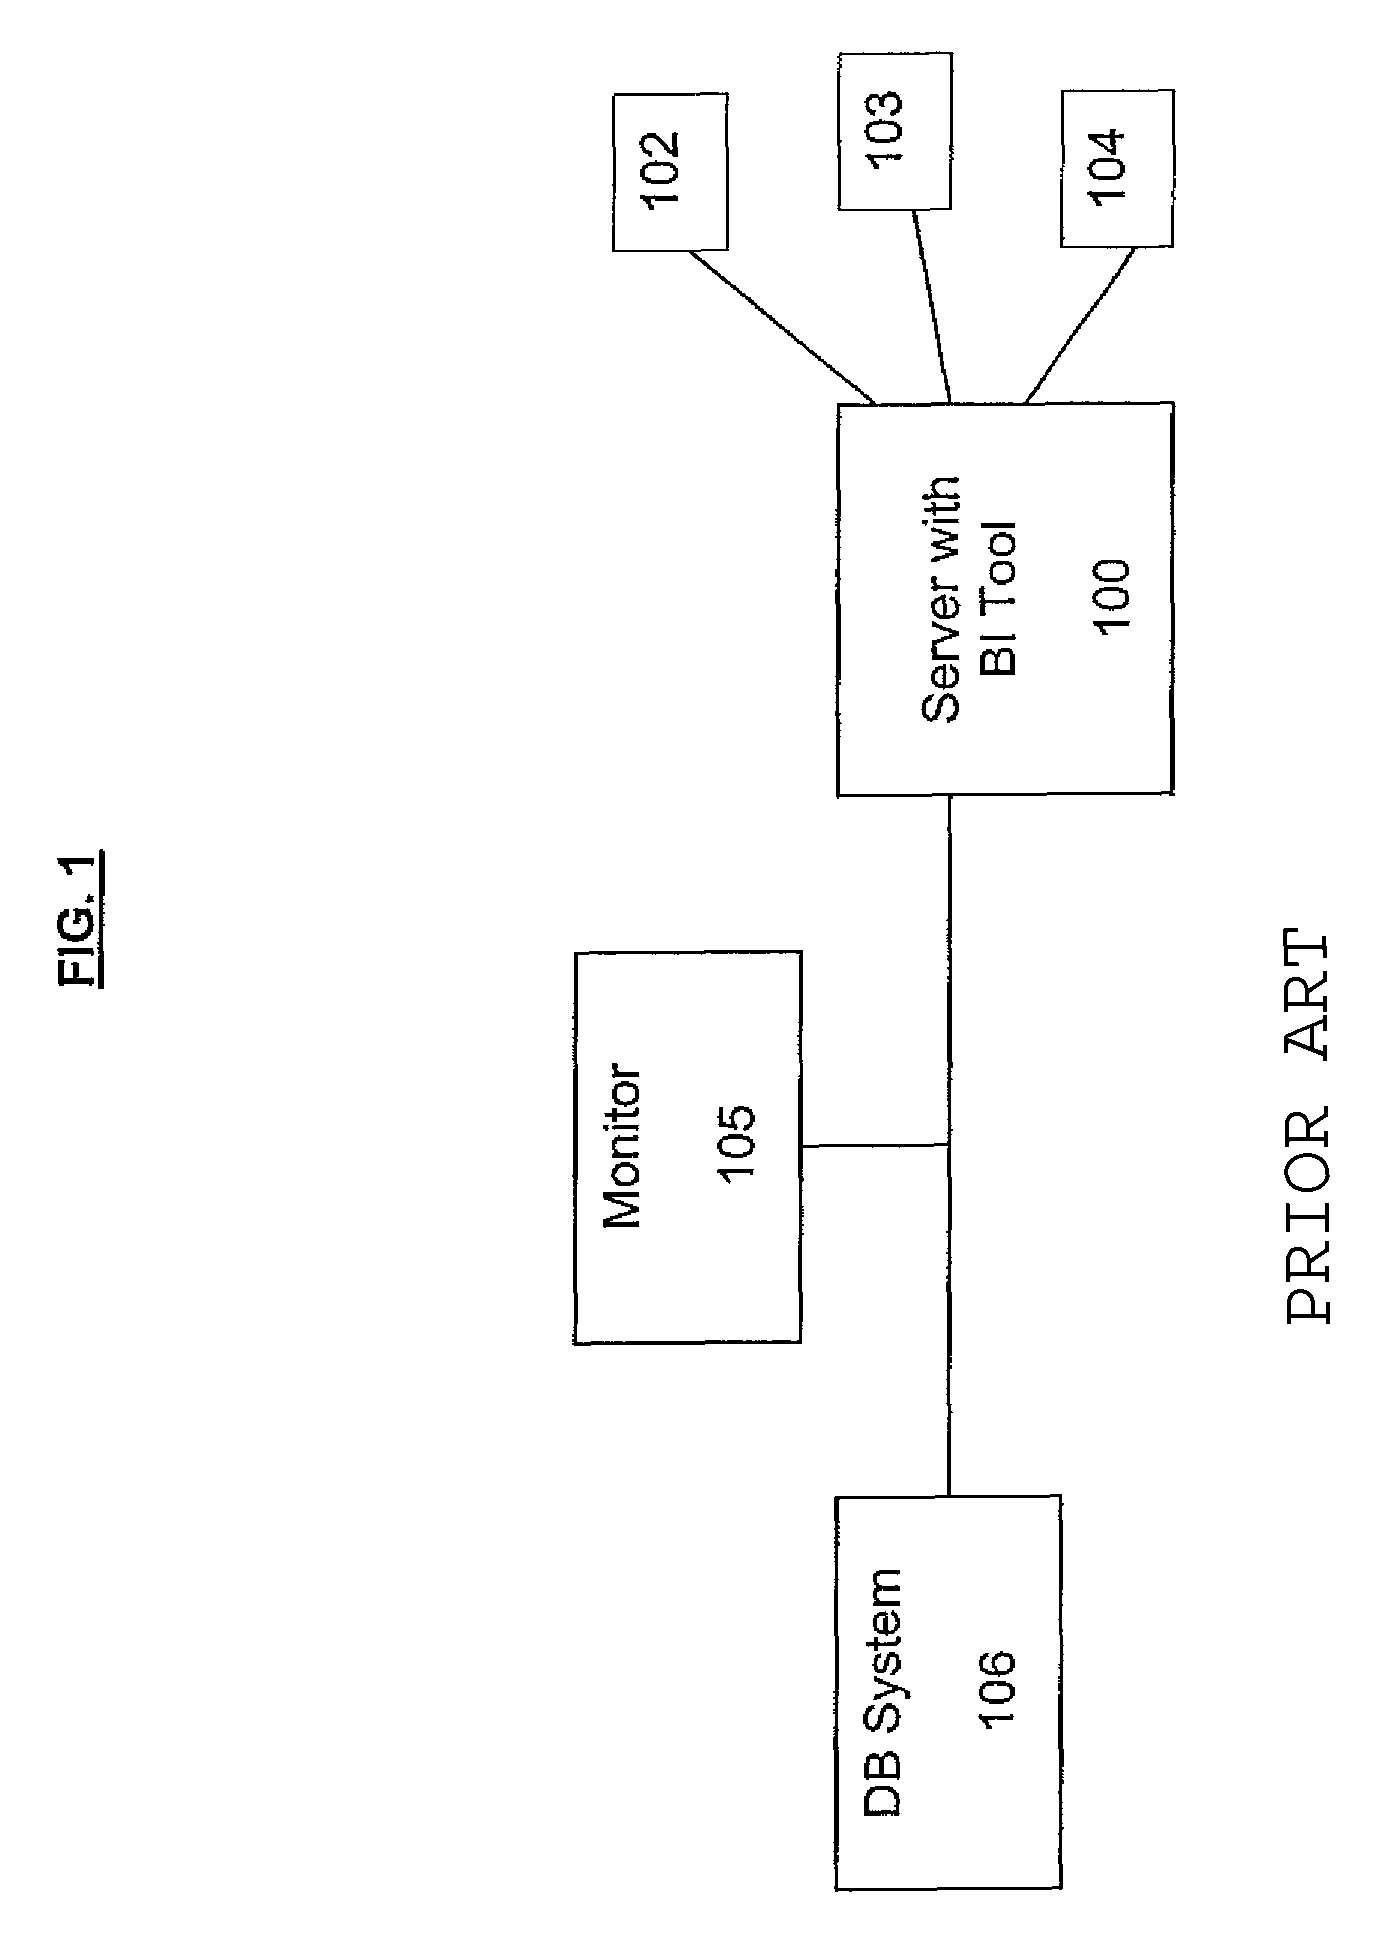 Monitoring and auditing system